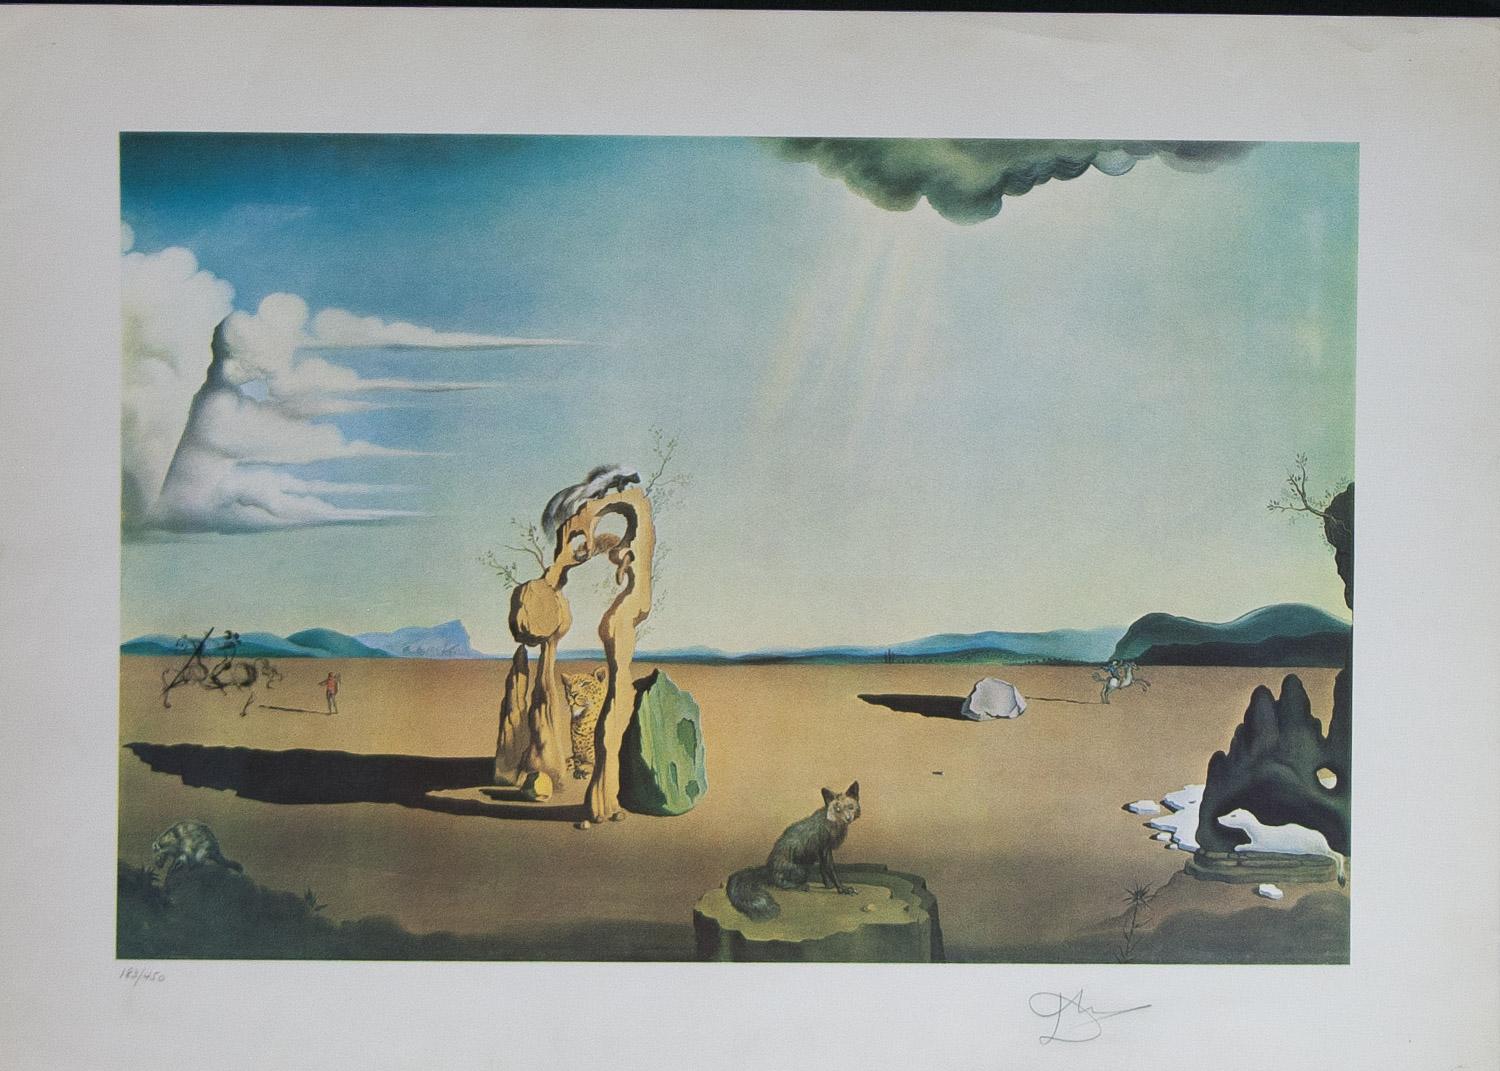 Savage Beasts in the Desert / Little Animal Kingdom color lithograph by Salvador